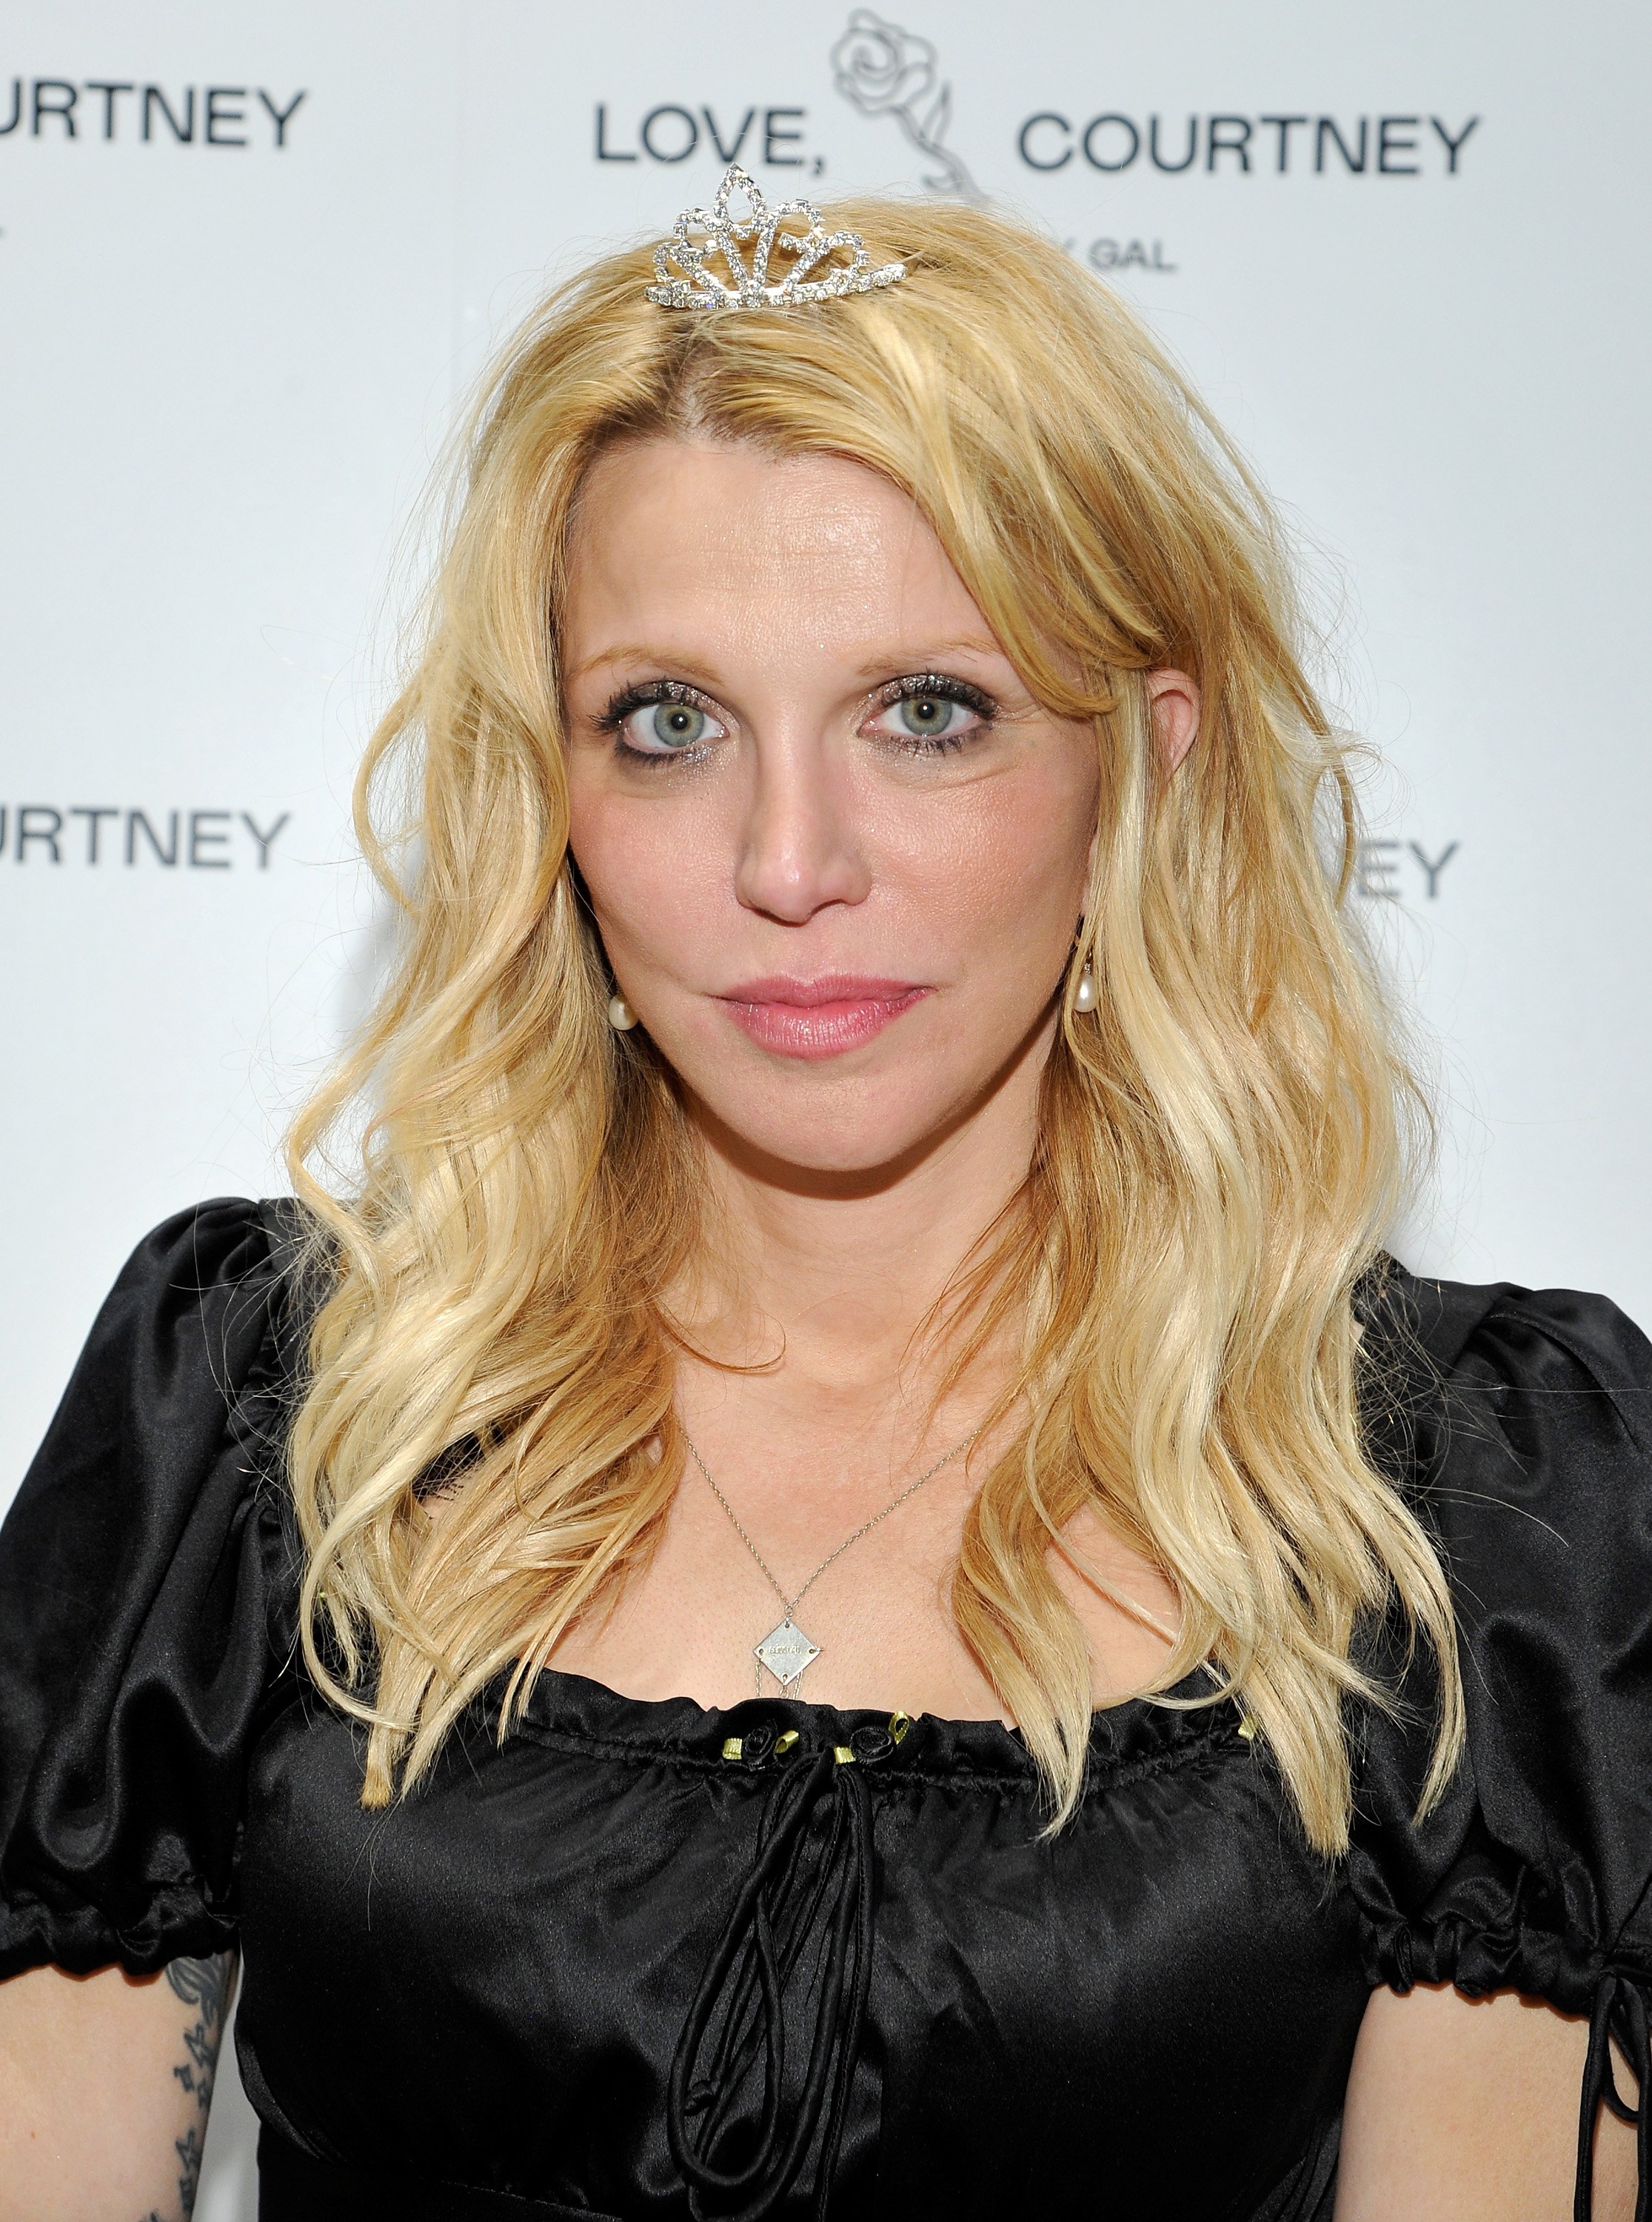 Courtney Love Pays Tribute to Late Husband Kurt Cobain on What Would've